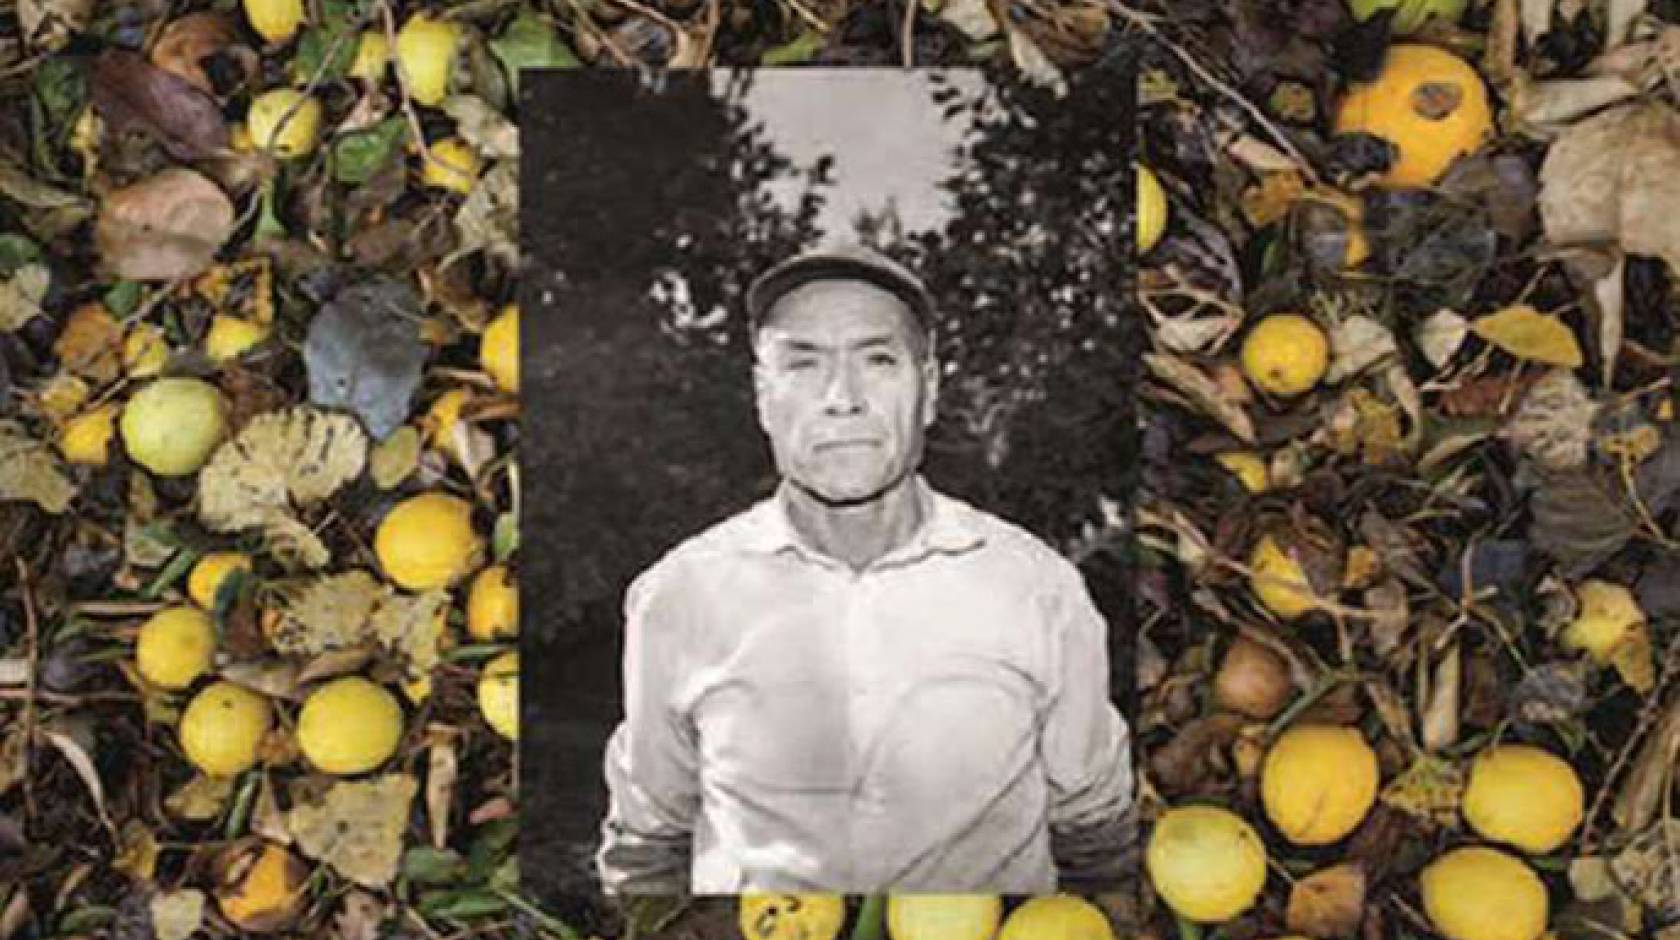 UCR researchers are uncovering hidden histories to help California Citrus State Historic Park tell a more inclusive story of the region’s citrus industry and use creative means to draw attention to it. This image is from “Manos, Espaldas y Blossoms (2017)